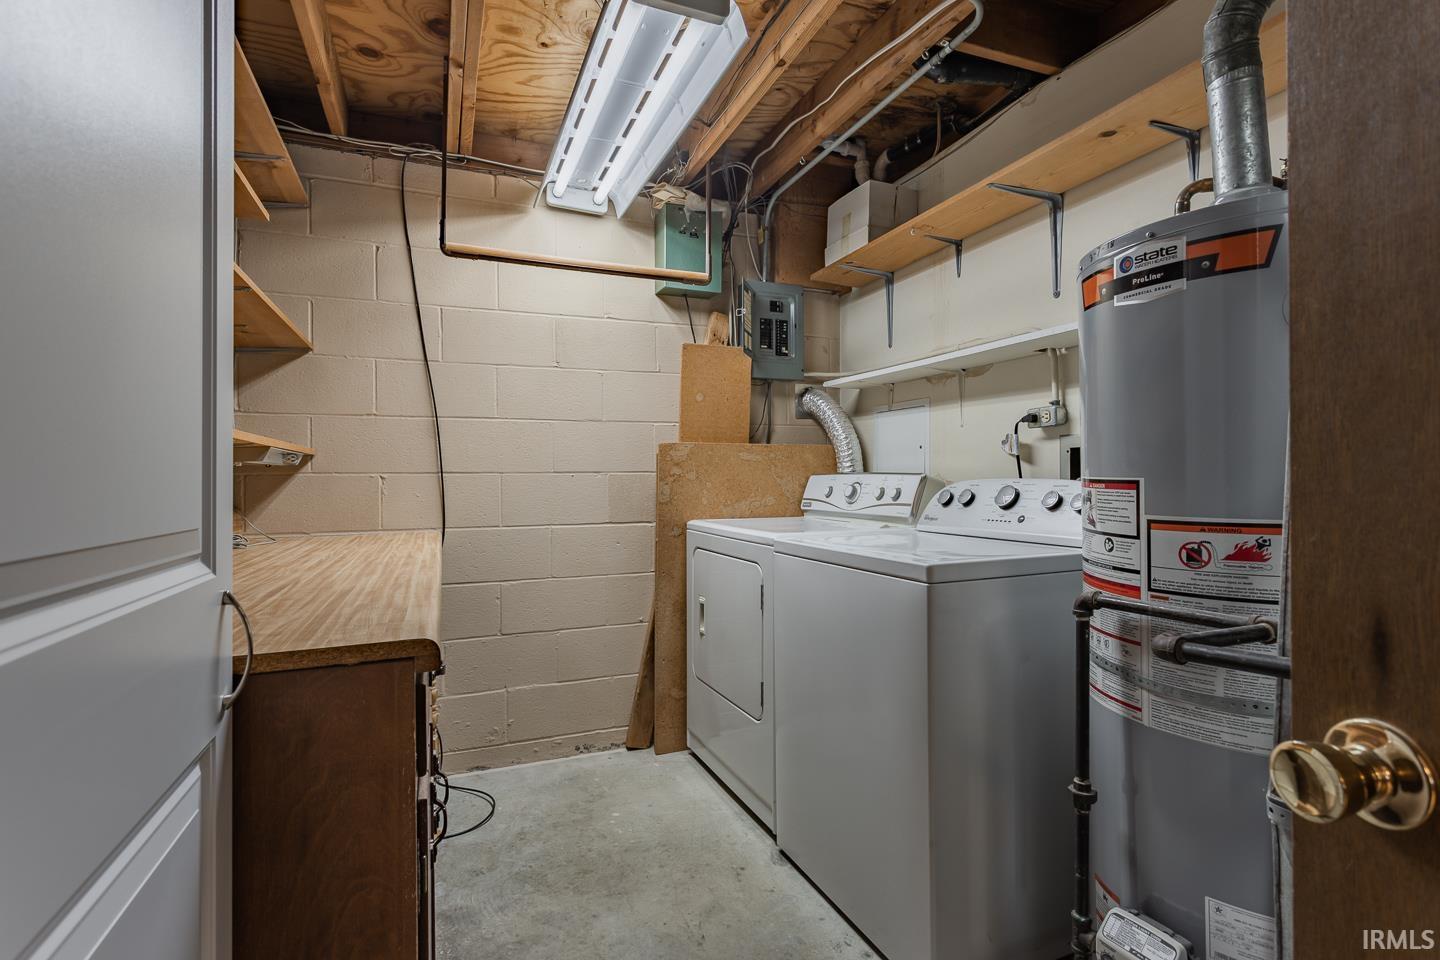 The utility room storage and counter space for laundry. The washer and dryer are included!